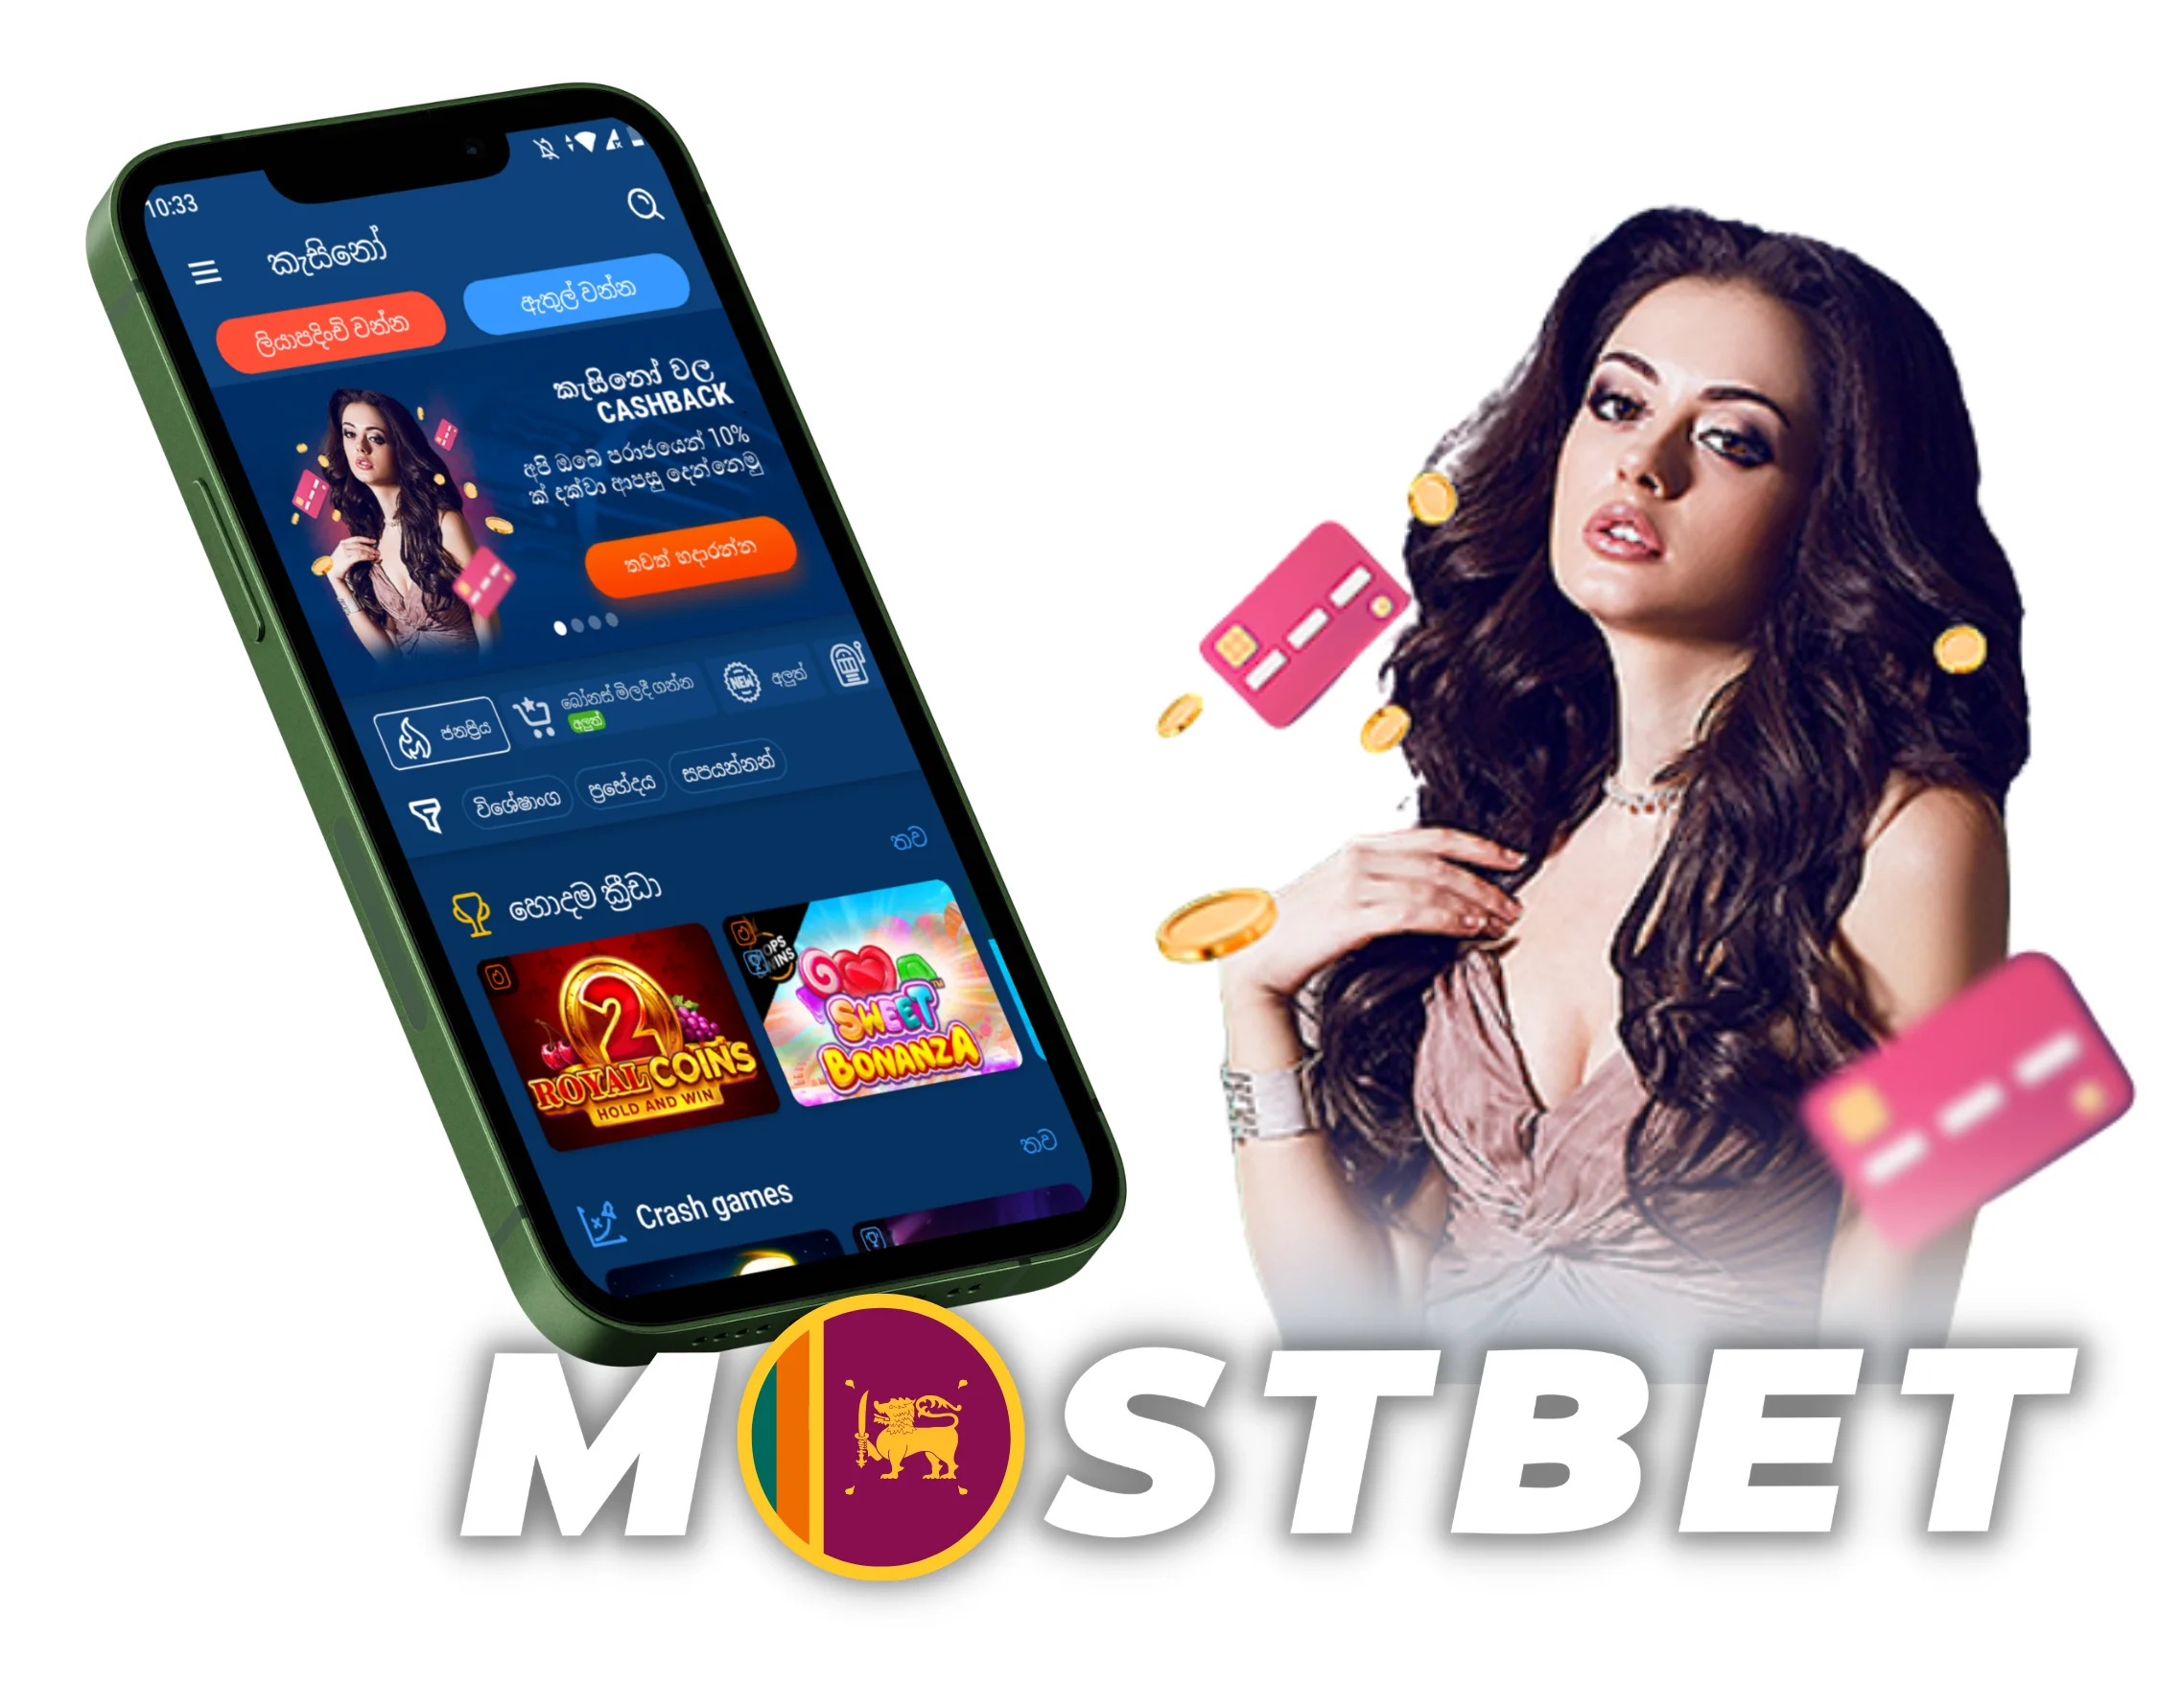 Want More Money? Start Mostbet Betting and Casino in Turkey